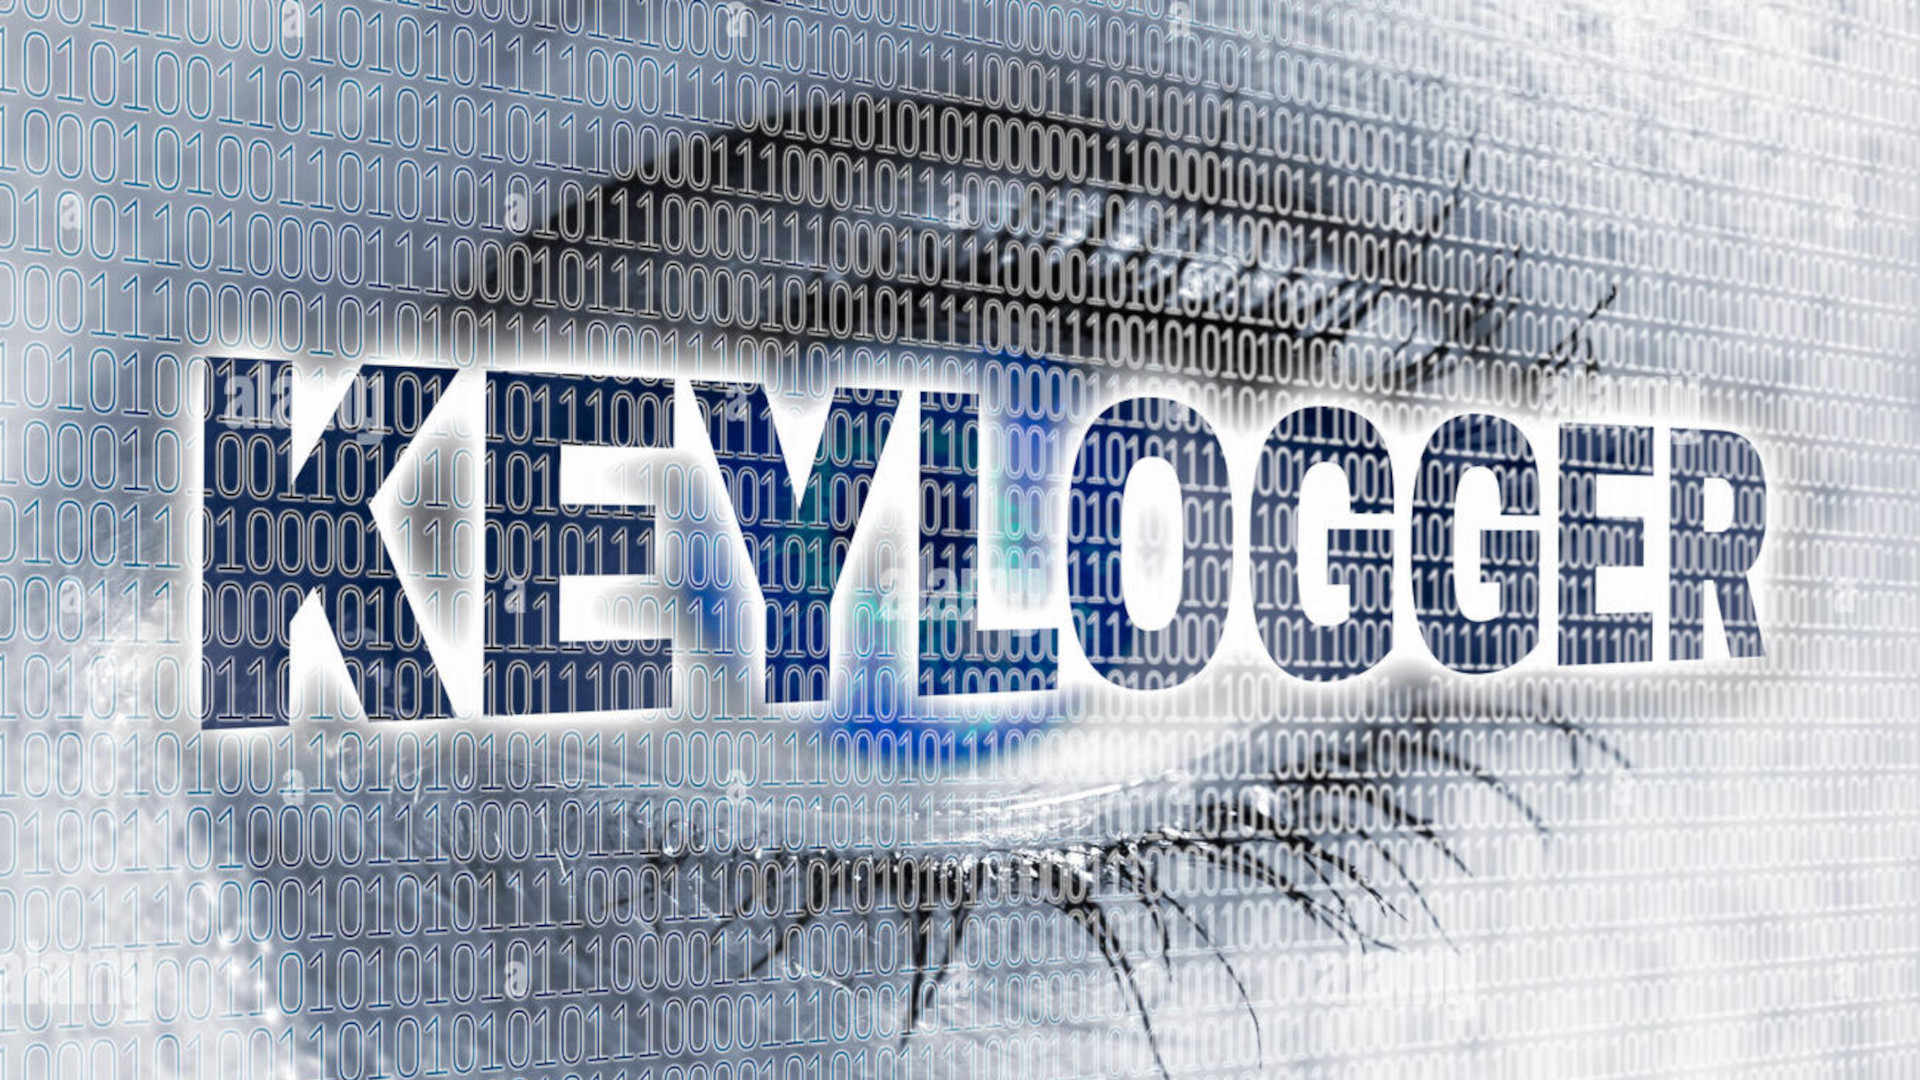 How To Create a Web Based PHP - Javascript Keylogger